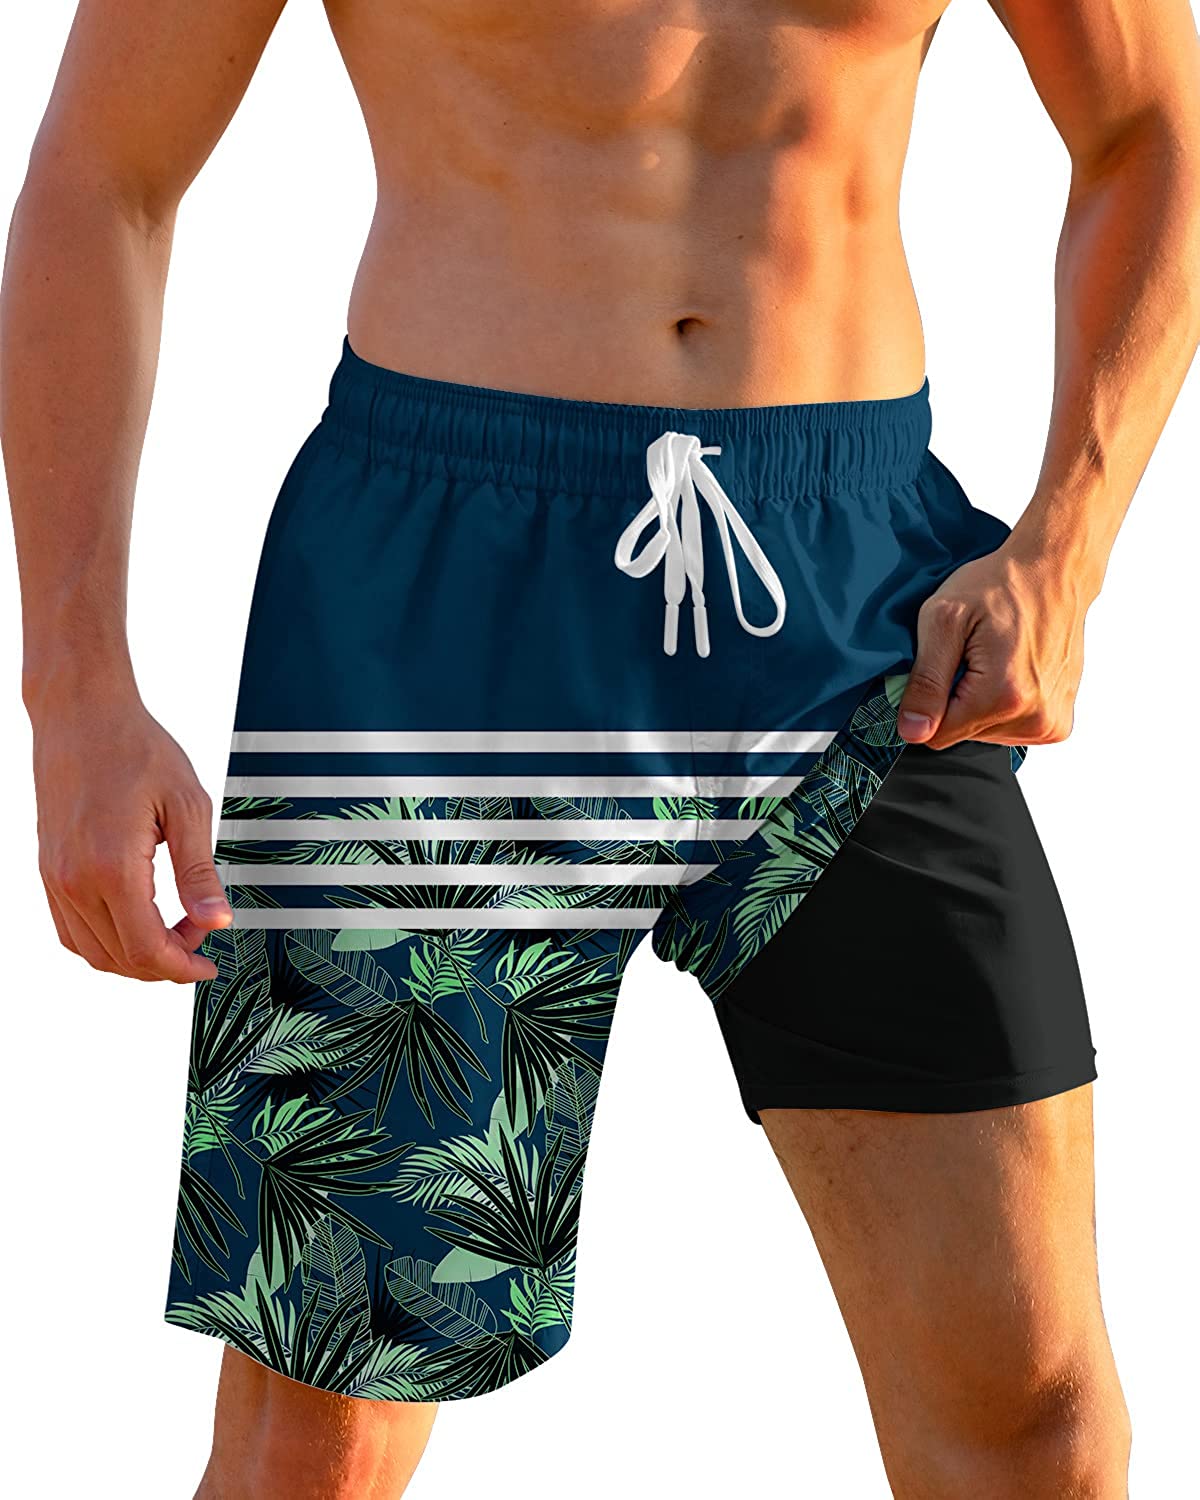 Shop Swimming Trunks Long Pants Men with great discounts and